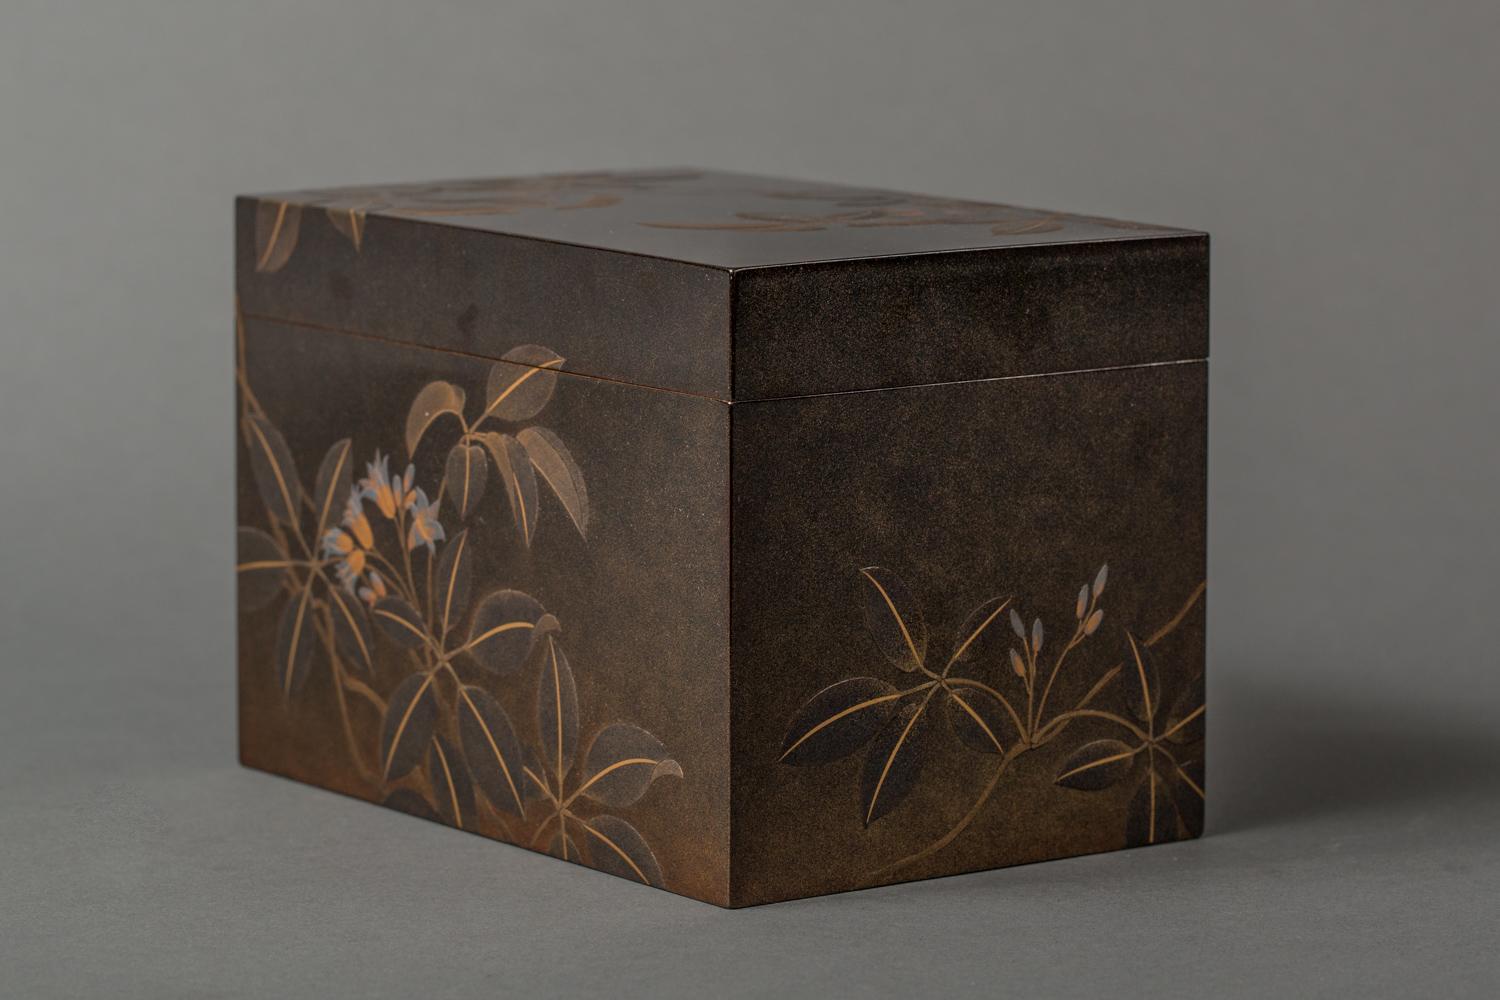 Japanese Lacquer Tea Box 'Chabako' with Flower Design In Excellent Condition For Sale In Hudson, NY